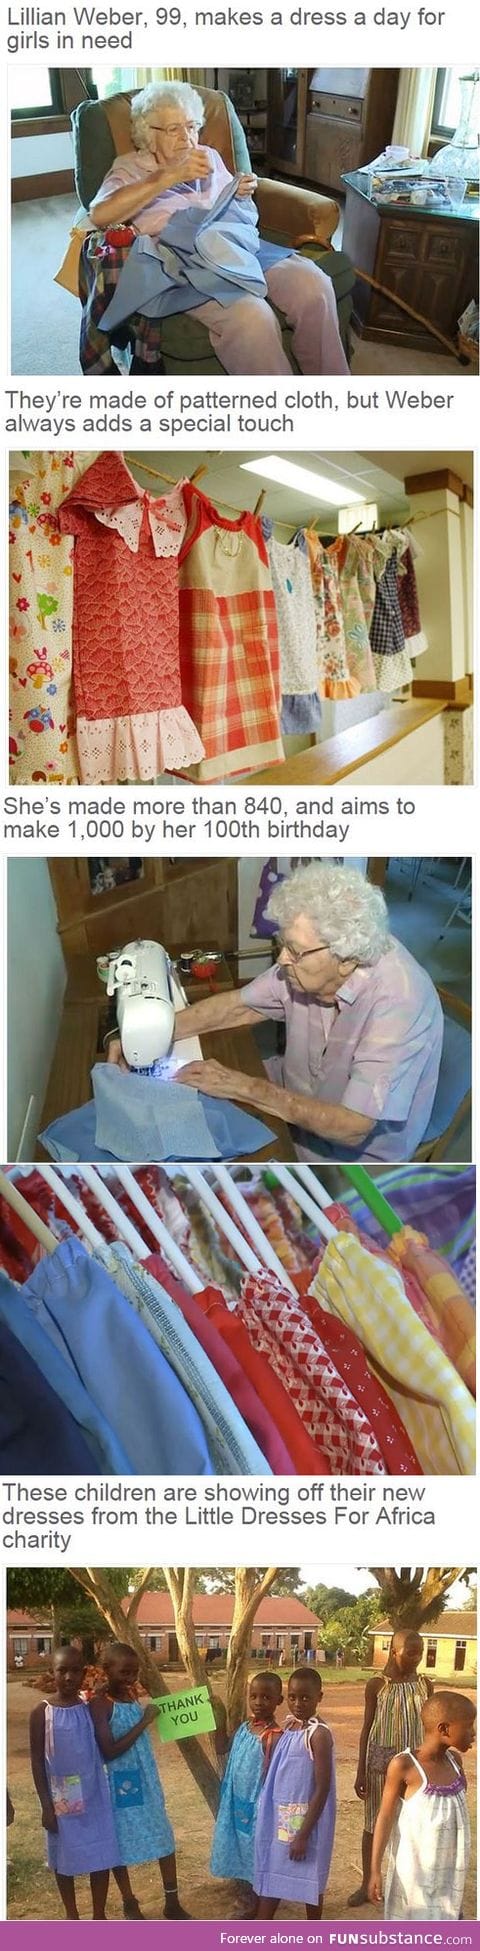 Faith in humanity: Restored